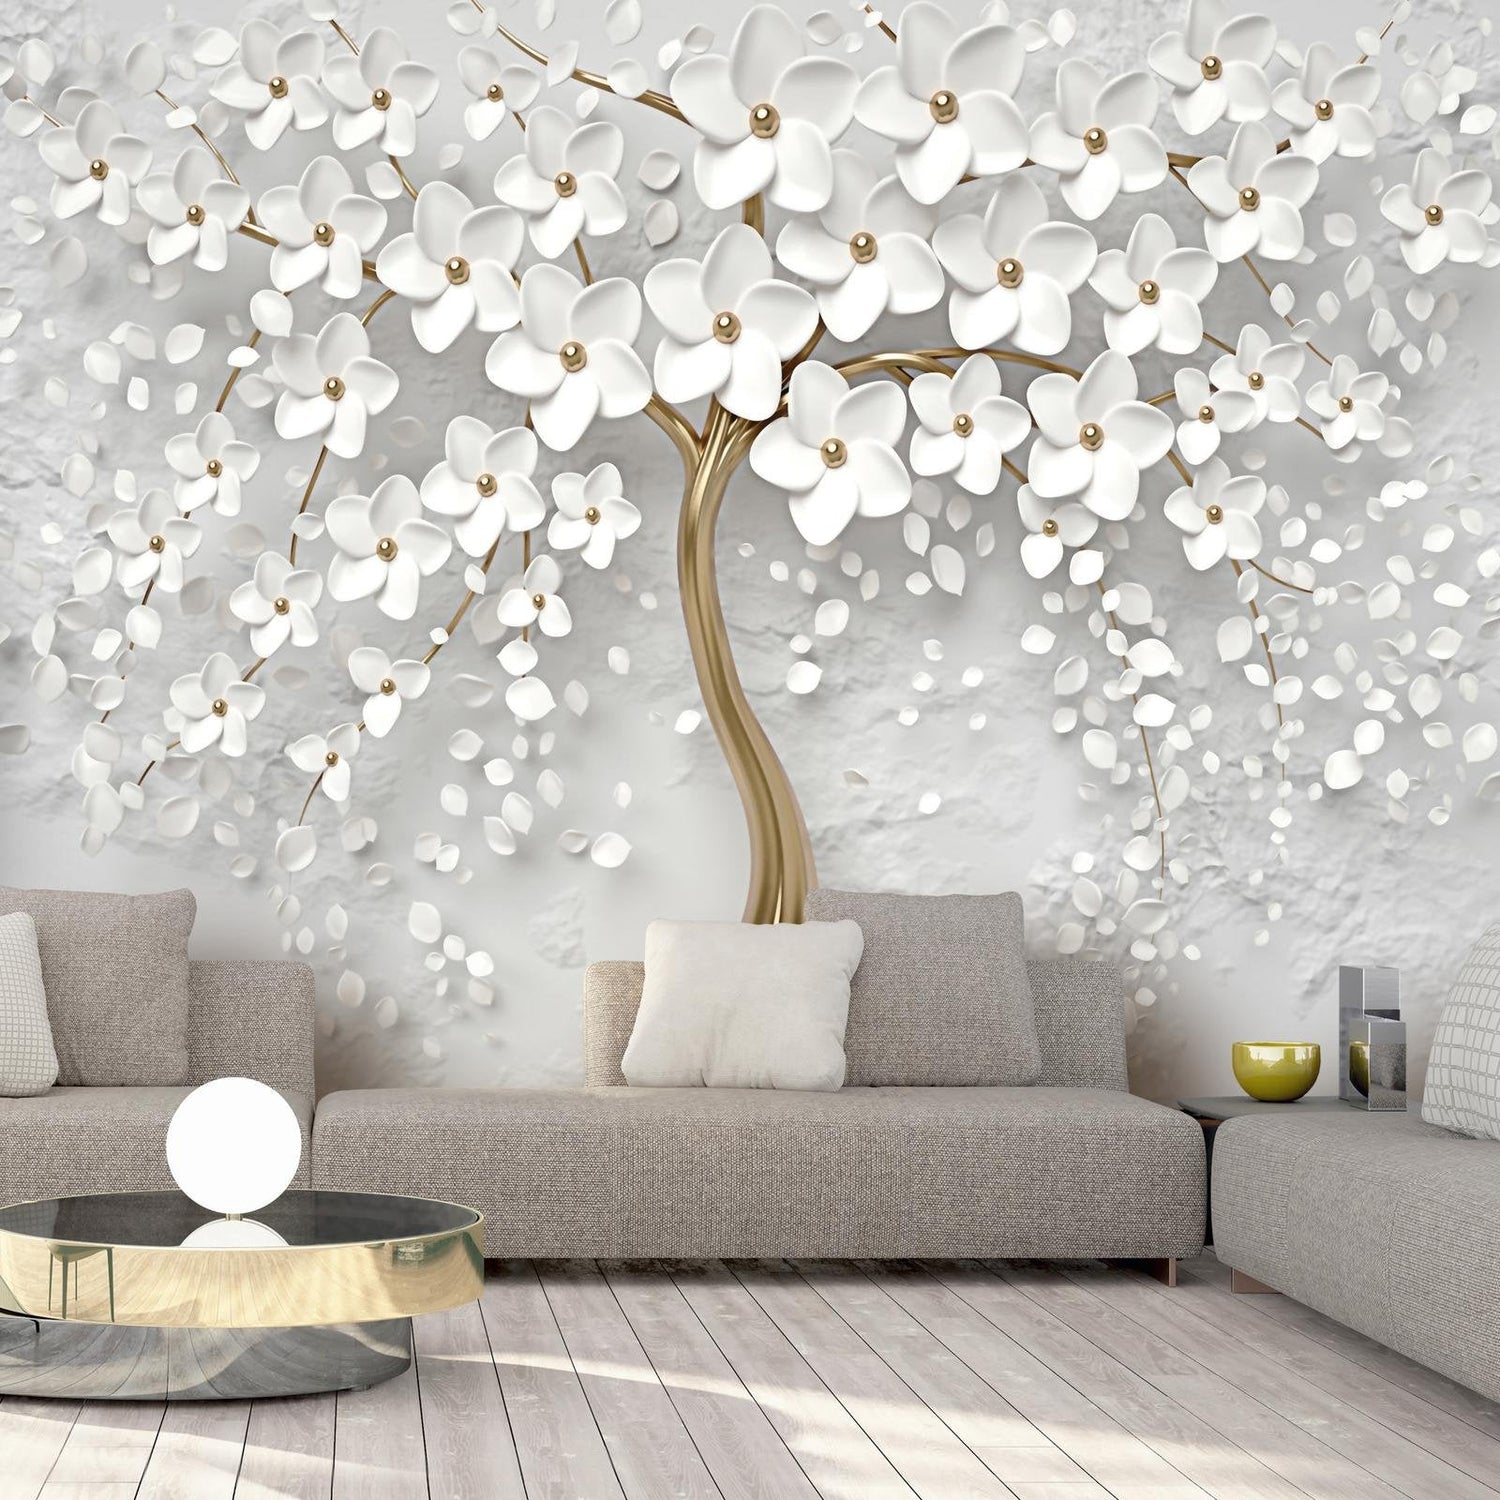 Tiptophomedecor Peel and Stick Floral Wallpaper Wall Mural - Magic Magnolia - Removable Wall Decals-Tiptophomedecor